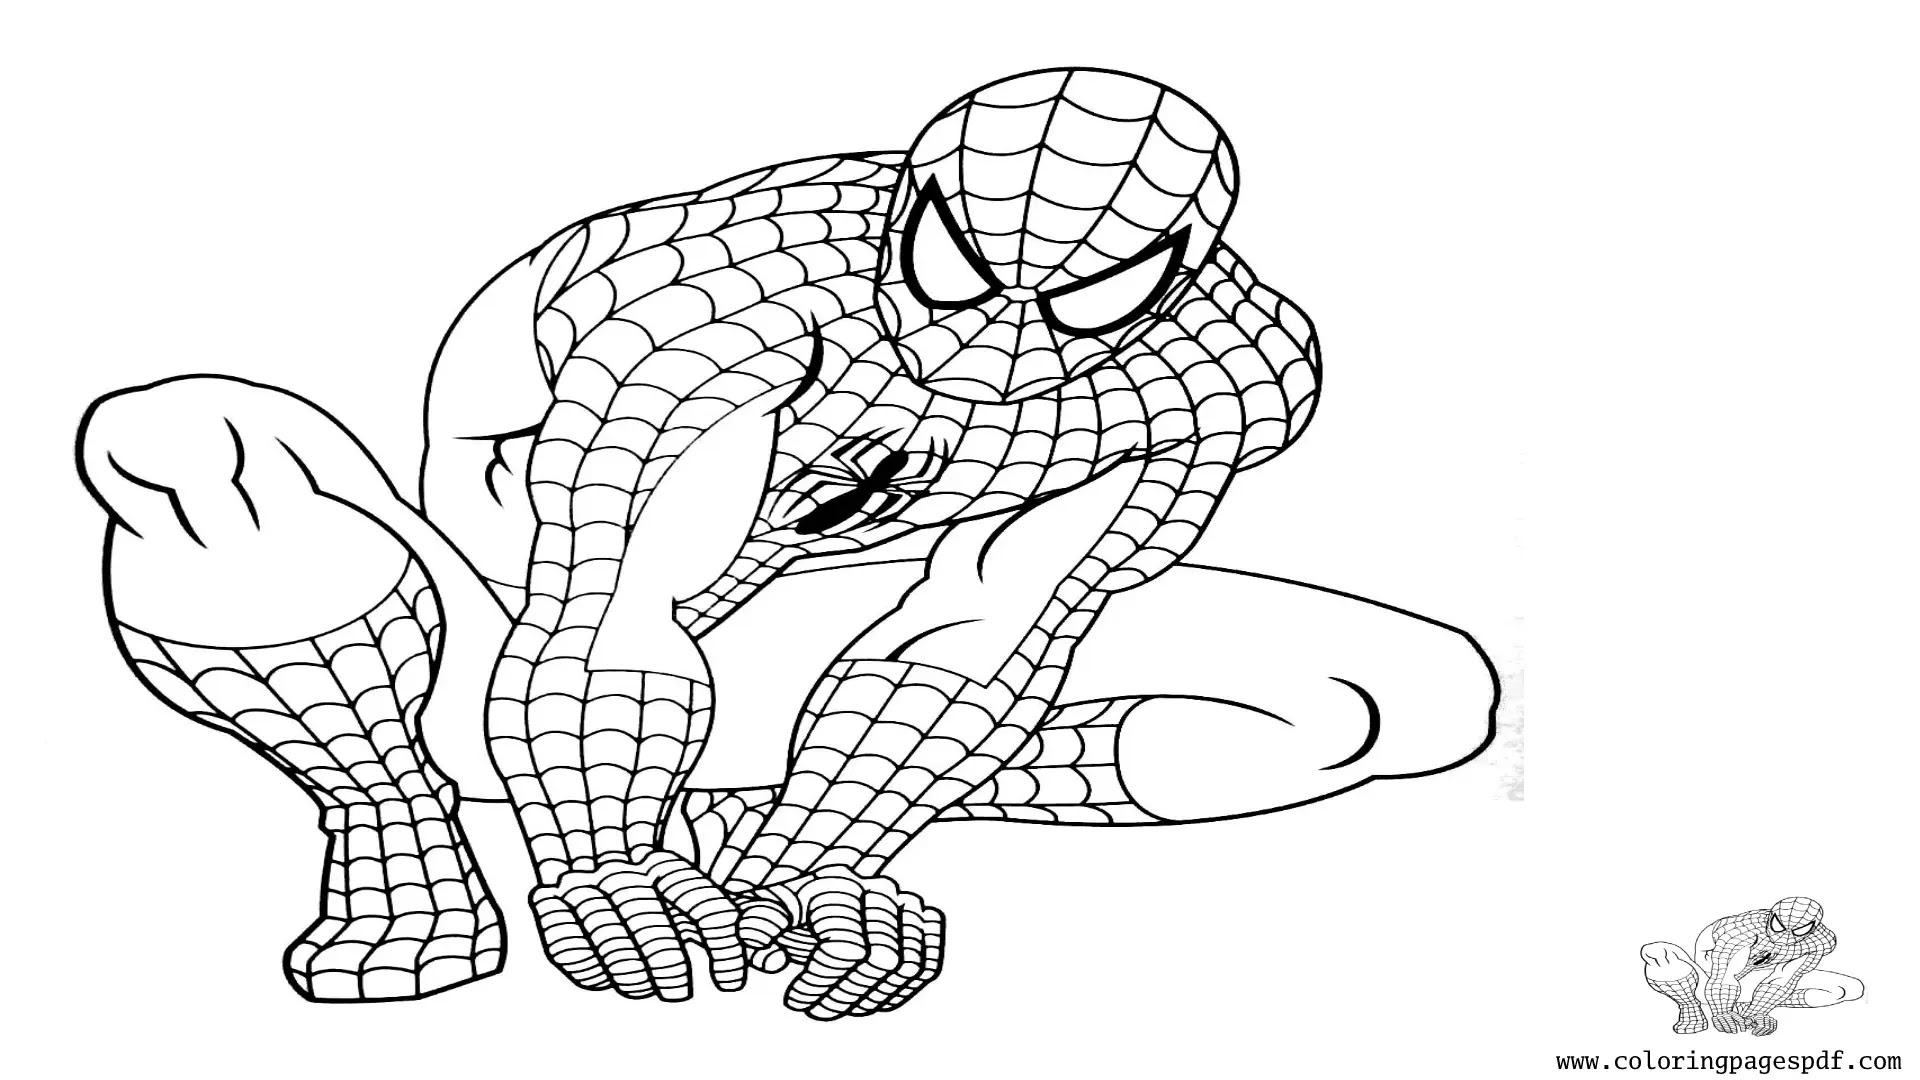 Coloring Page Of Spiderman Sitting